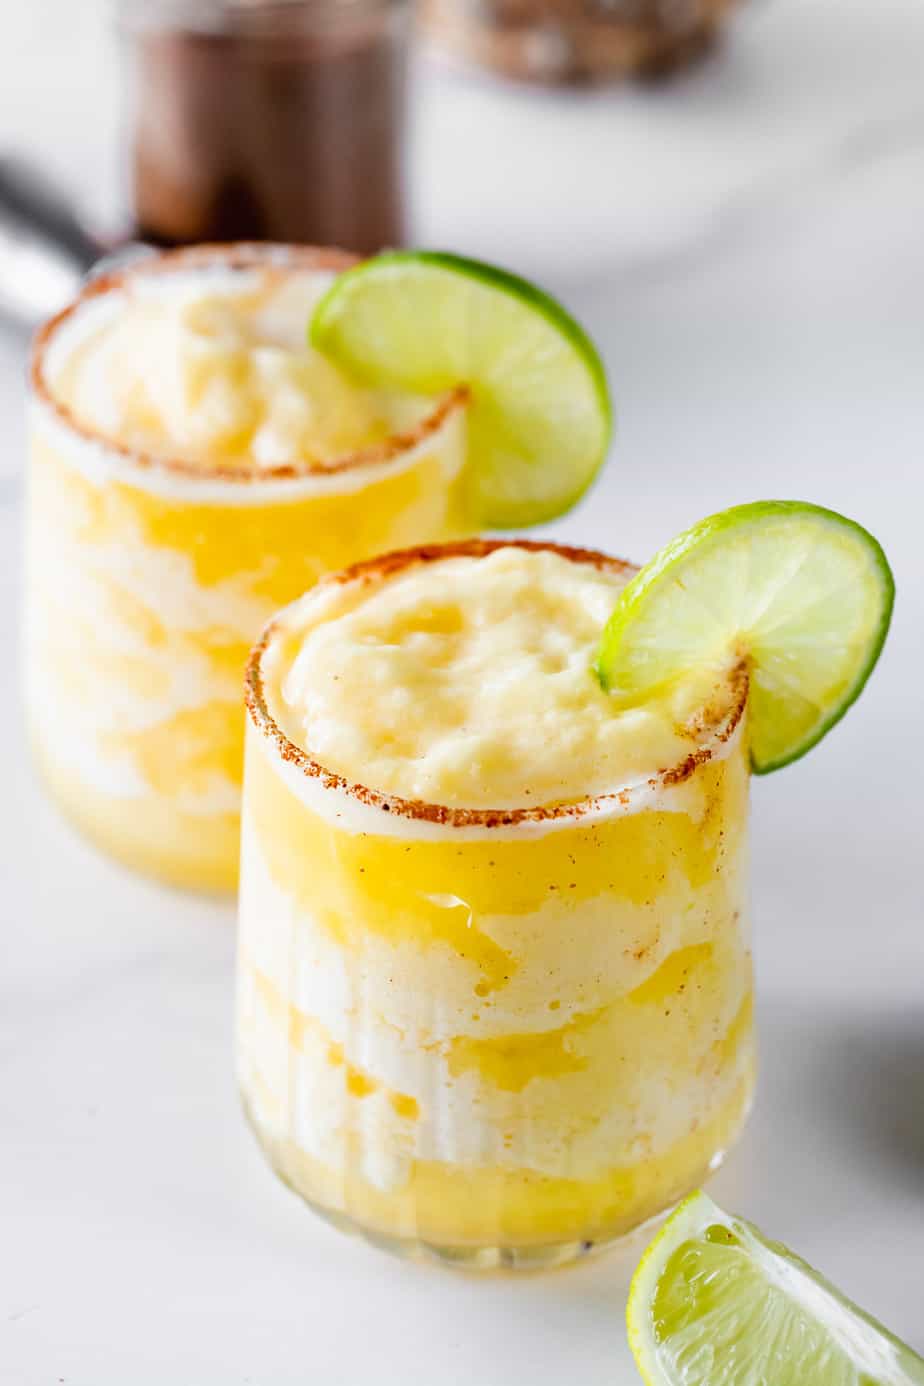 Pineapple margaritas with a spicy chili salt rim